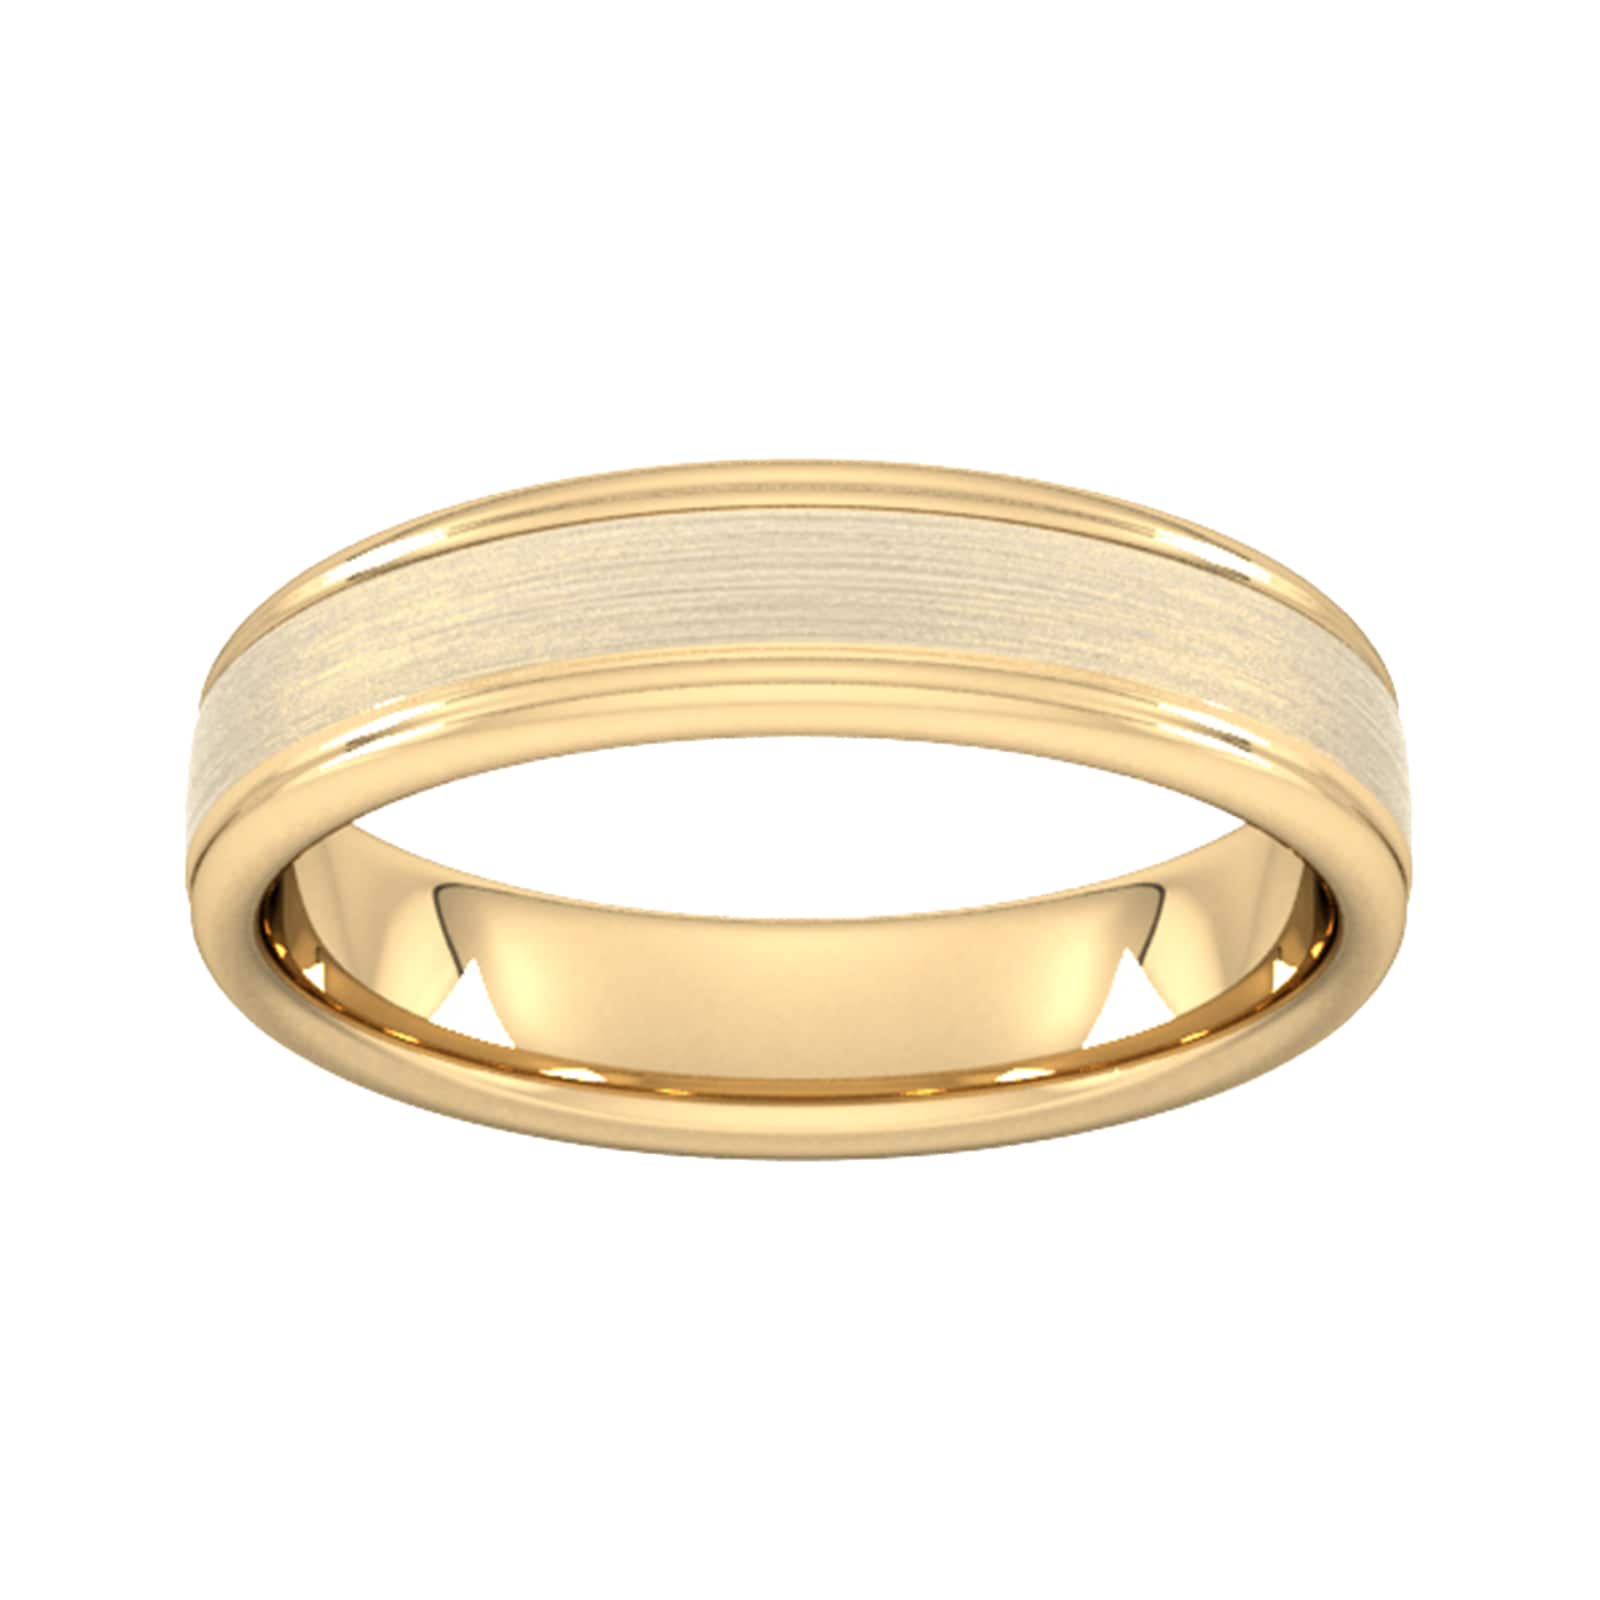 5mm Slight Court Standard Matt Centre With Grooves Wedding Ring In 9 Carat Yellow Gold - Ring Size J